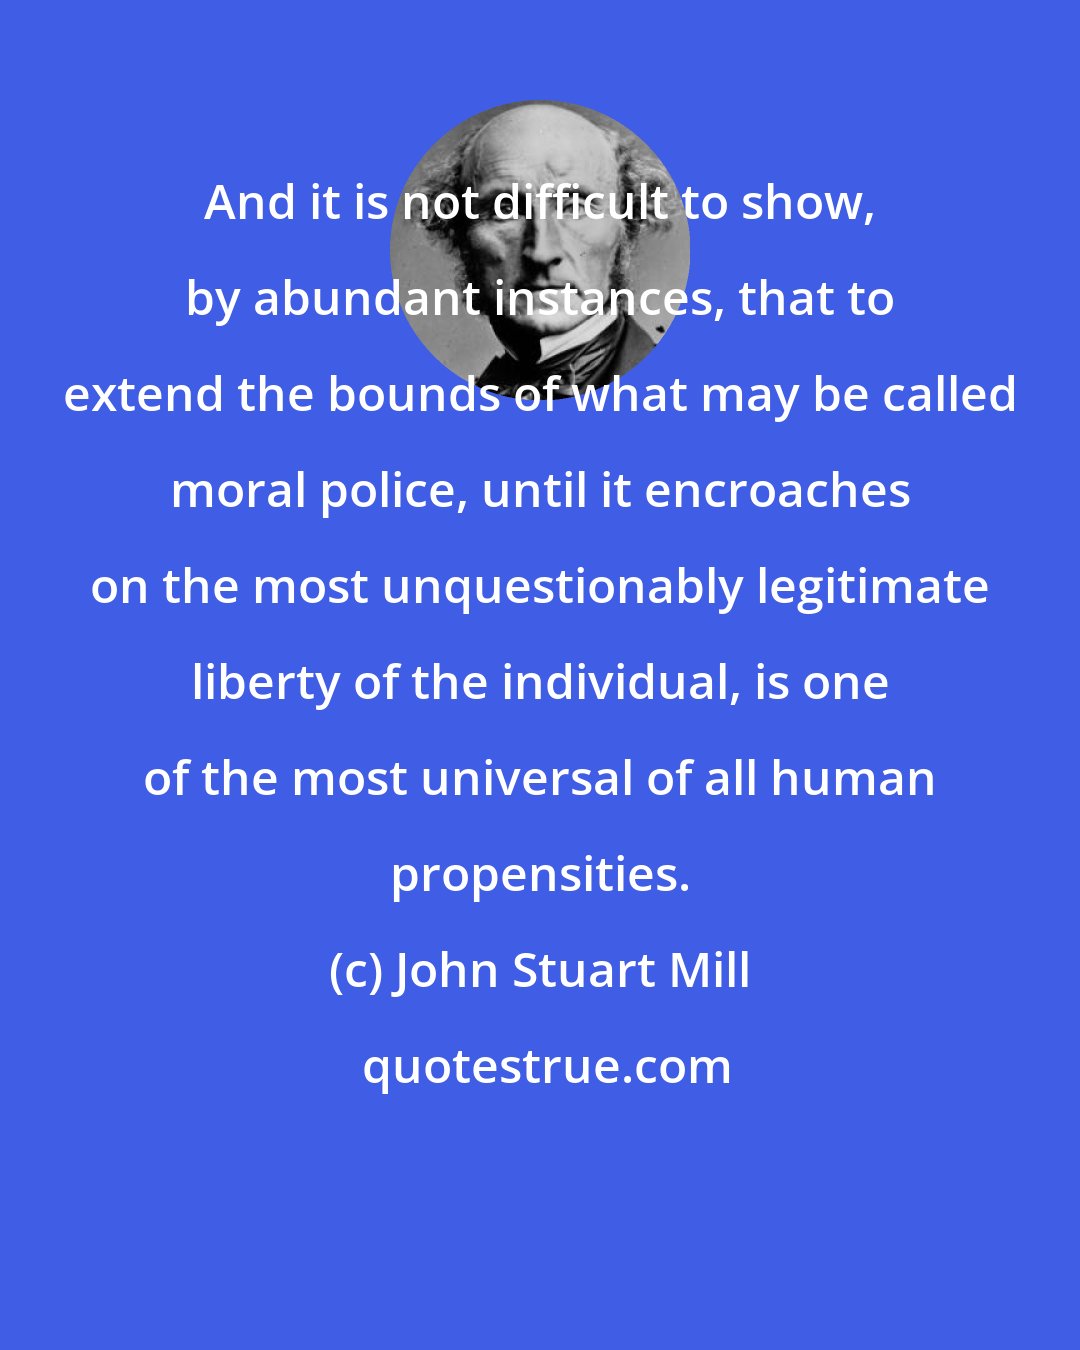 John Stuart Mill: And it is not difficult to show, by abundant instances, that to extend the bounds of what may be called moral police, until it encroaches on the most unquestionably legitimate liberty of the individual, is one of the most universal of all human propensities.